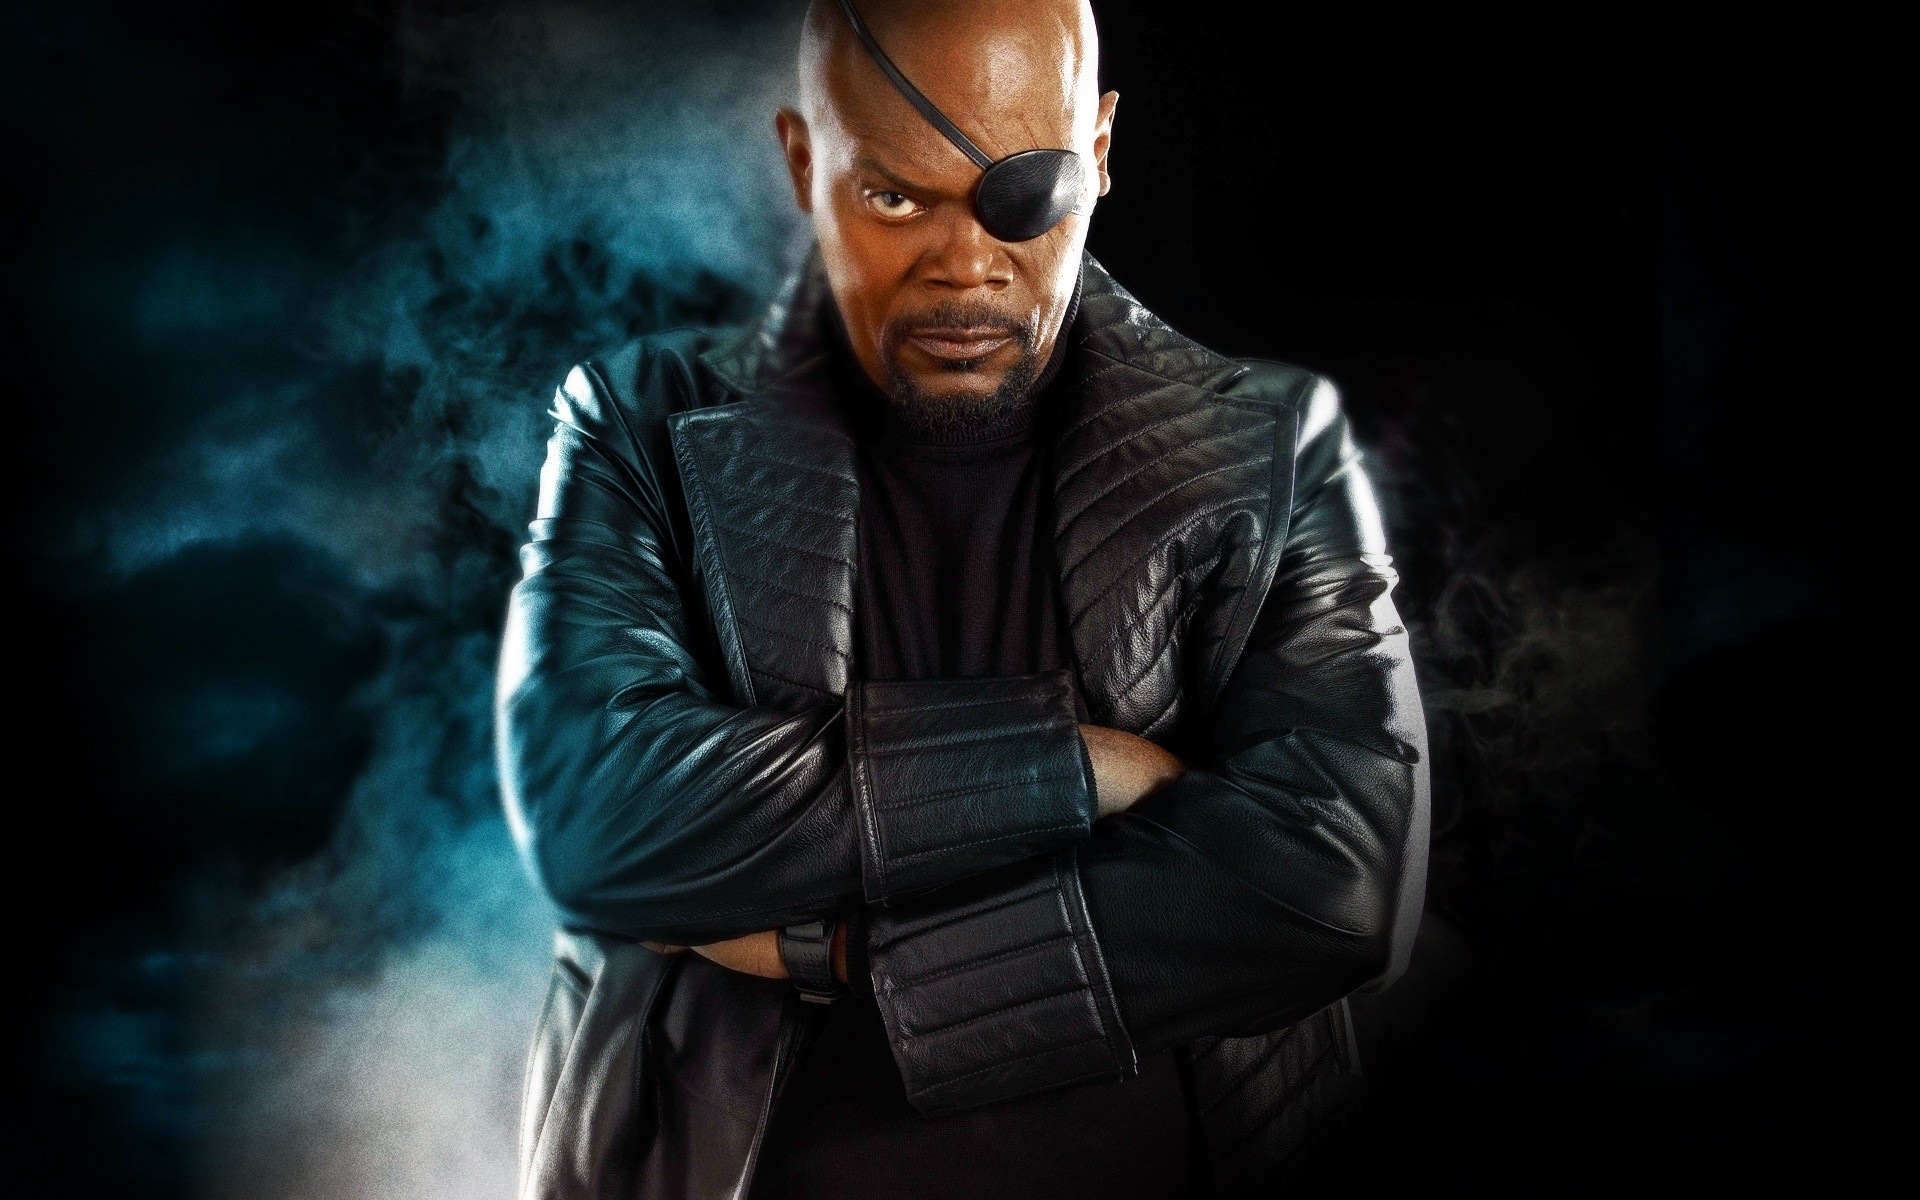 Samuel L Jackson Nick Fury Eyepatches Arms Crossed Captain America The Winter Soldier Arms On Chest  1920x1200